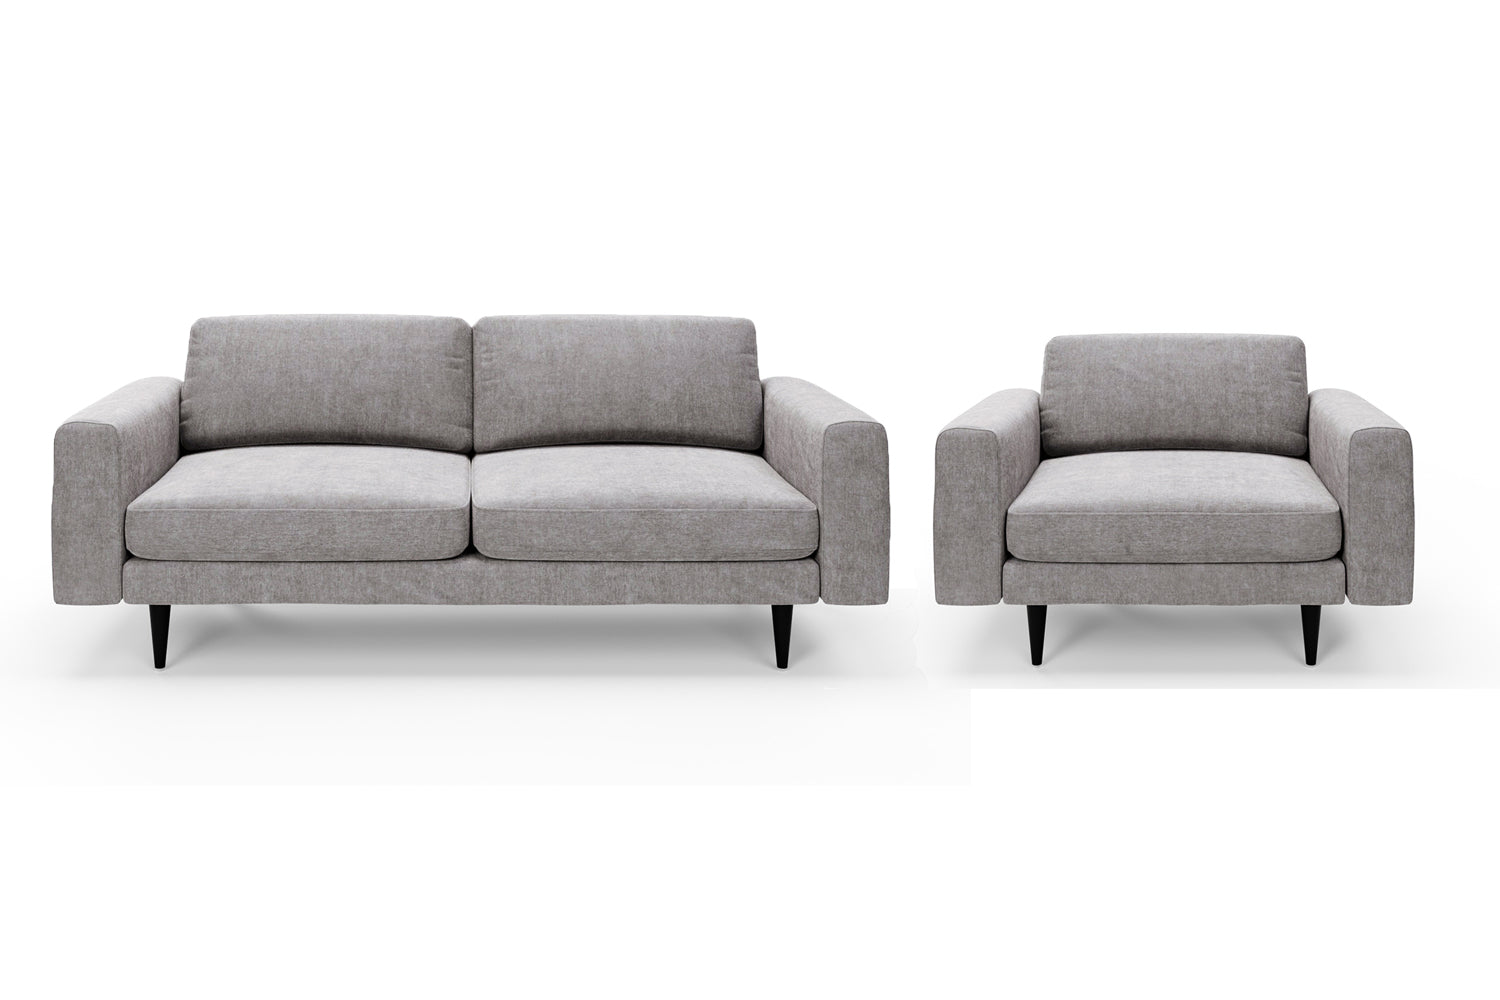 The Big Chill - 3 Seater Sofa and 1.5 Seater Snuggler Set - Mid Grey